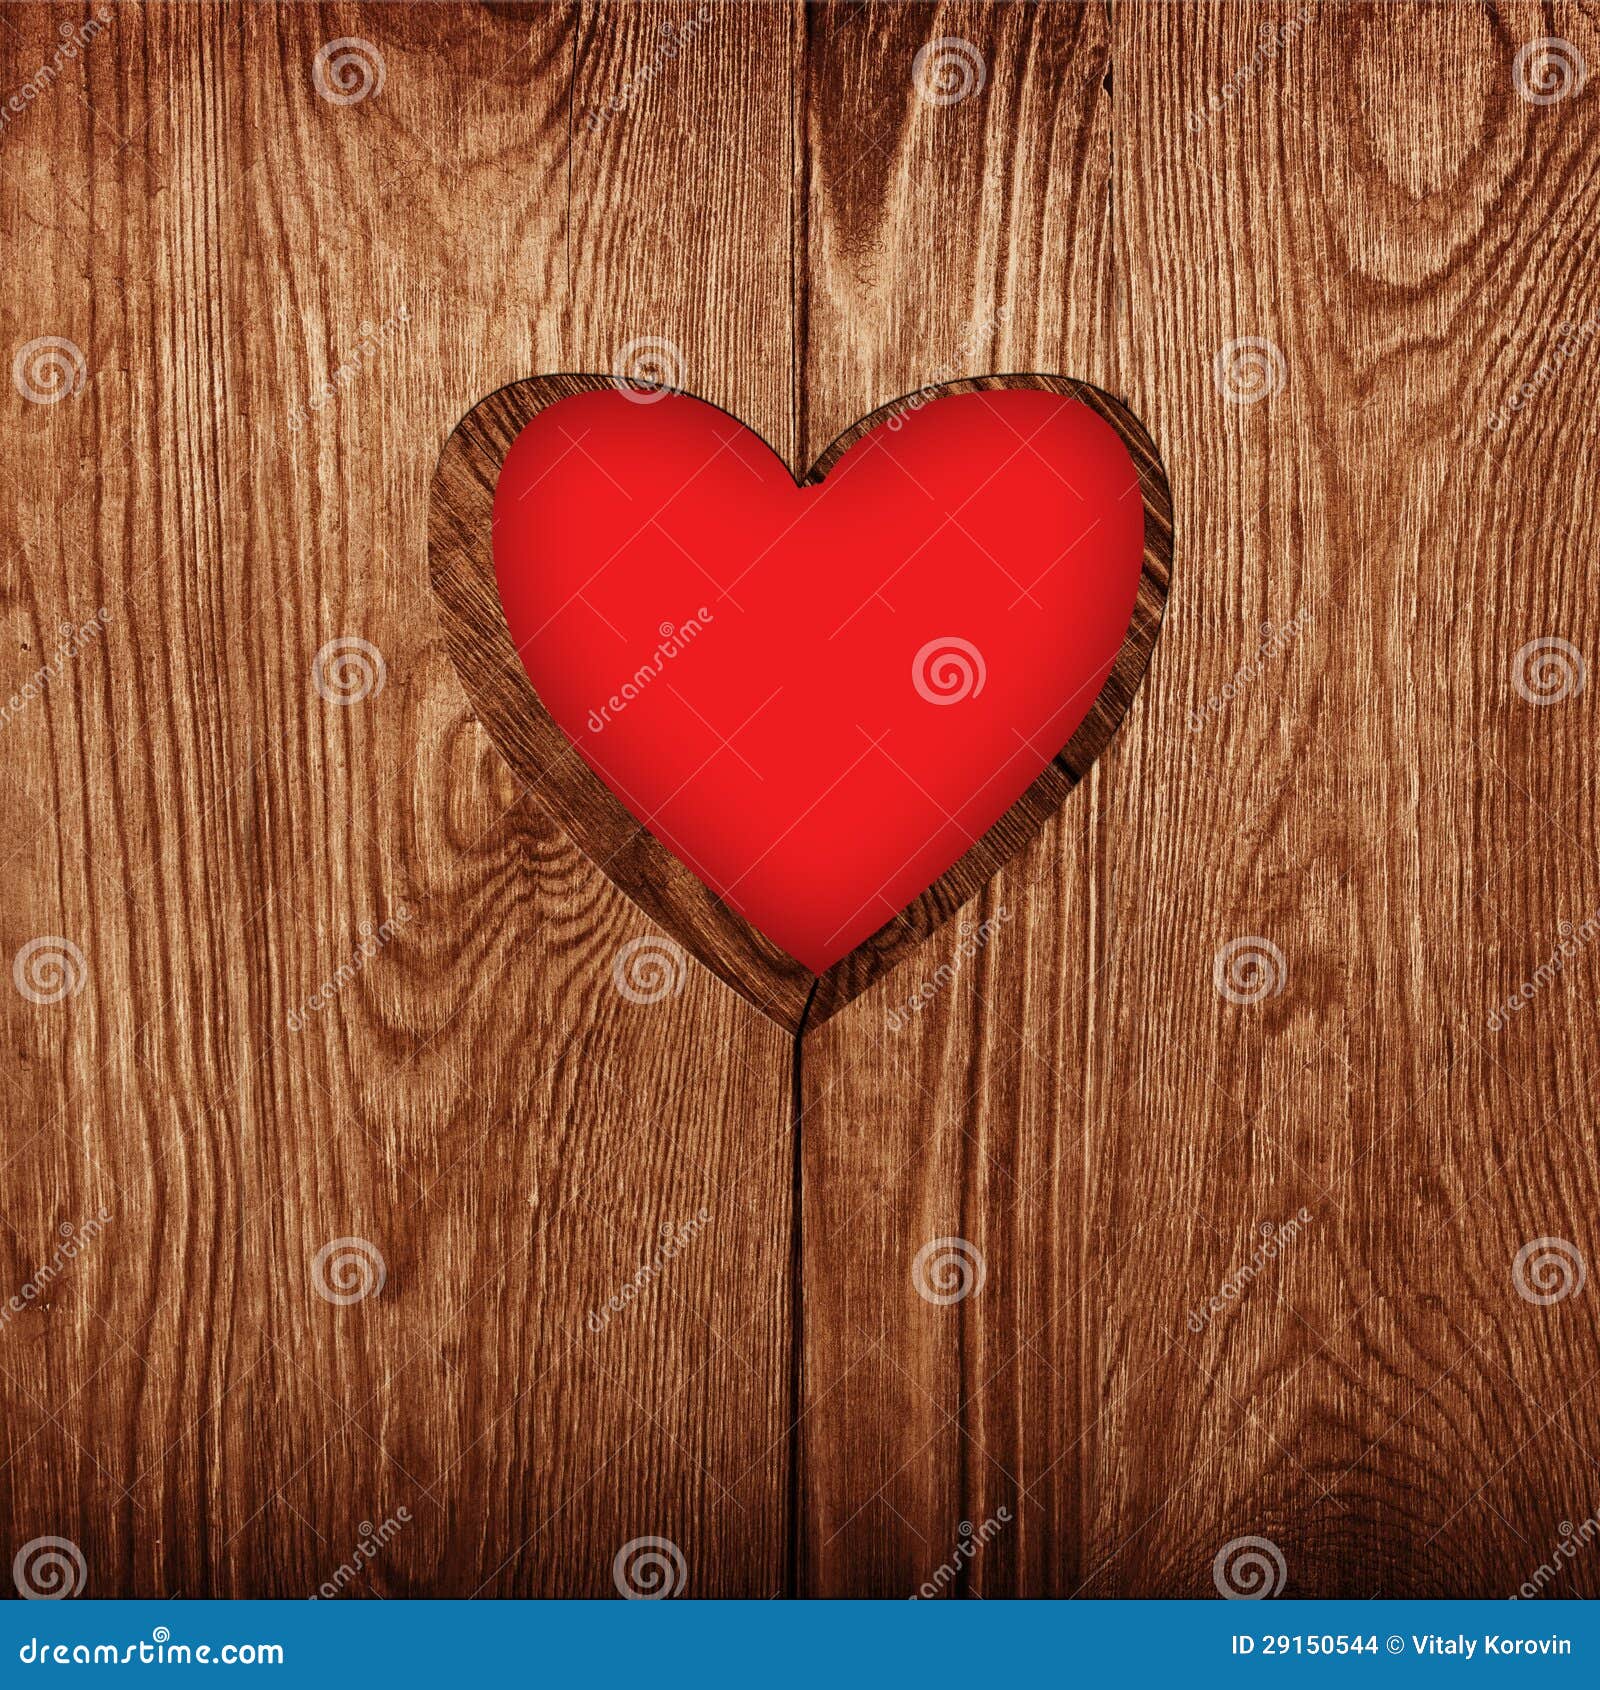 Heart in wood stock photo. Image of design, valentines - 29150544